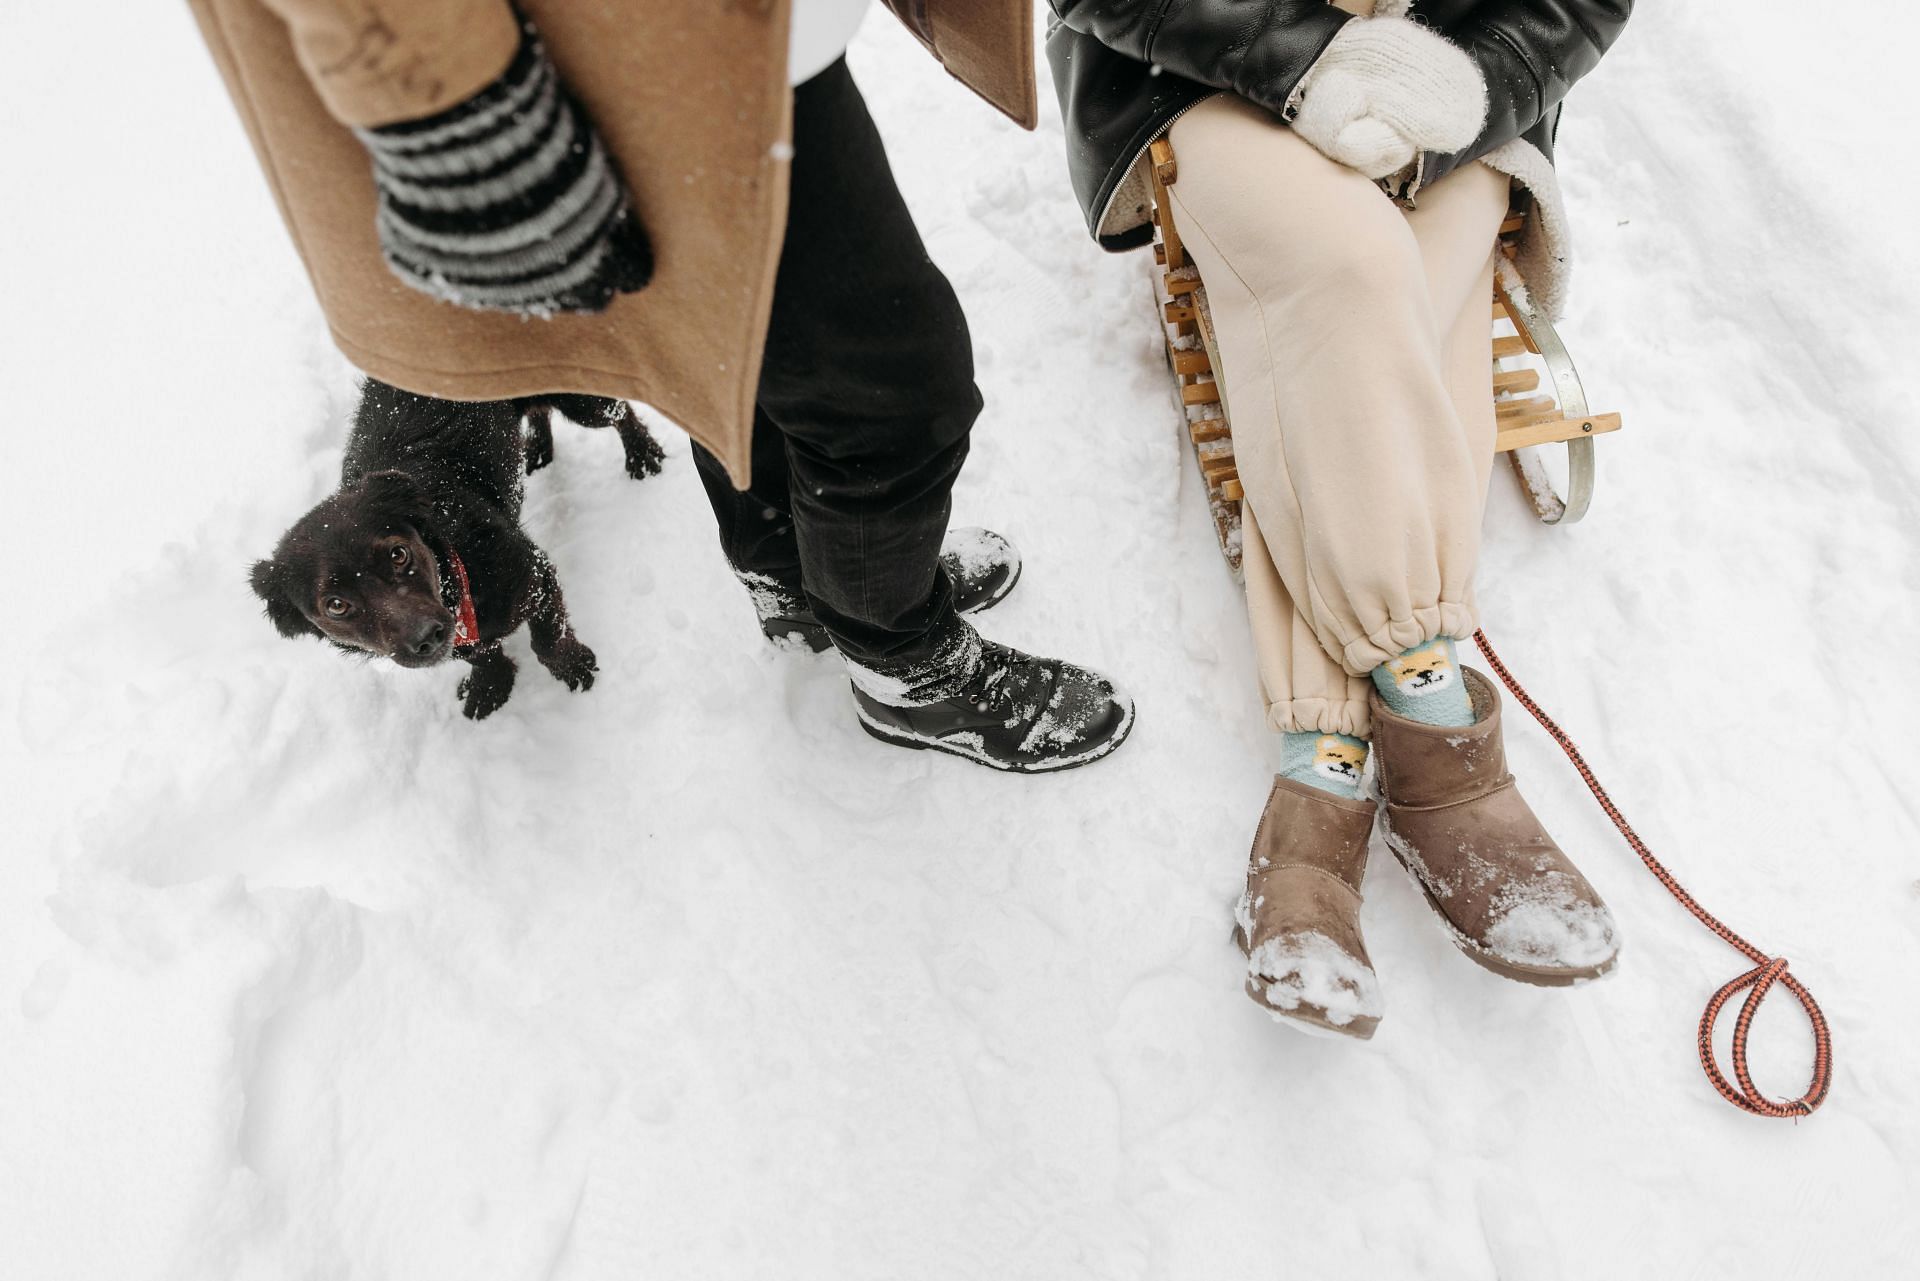 why are my toes always cold (image sourced via Pexels / Photo by pavel)